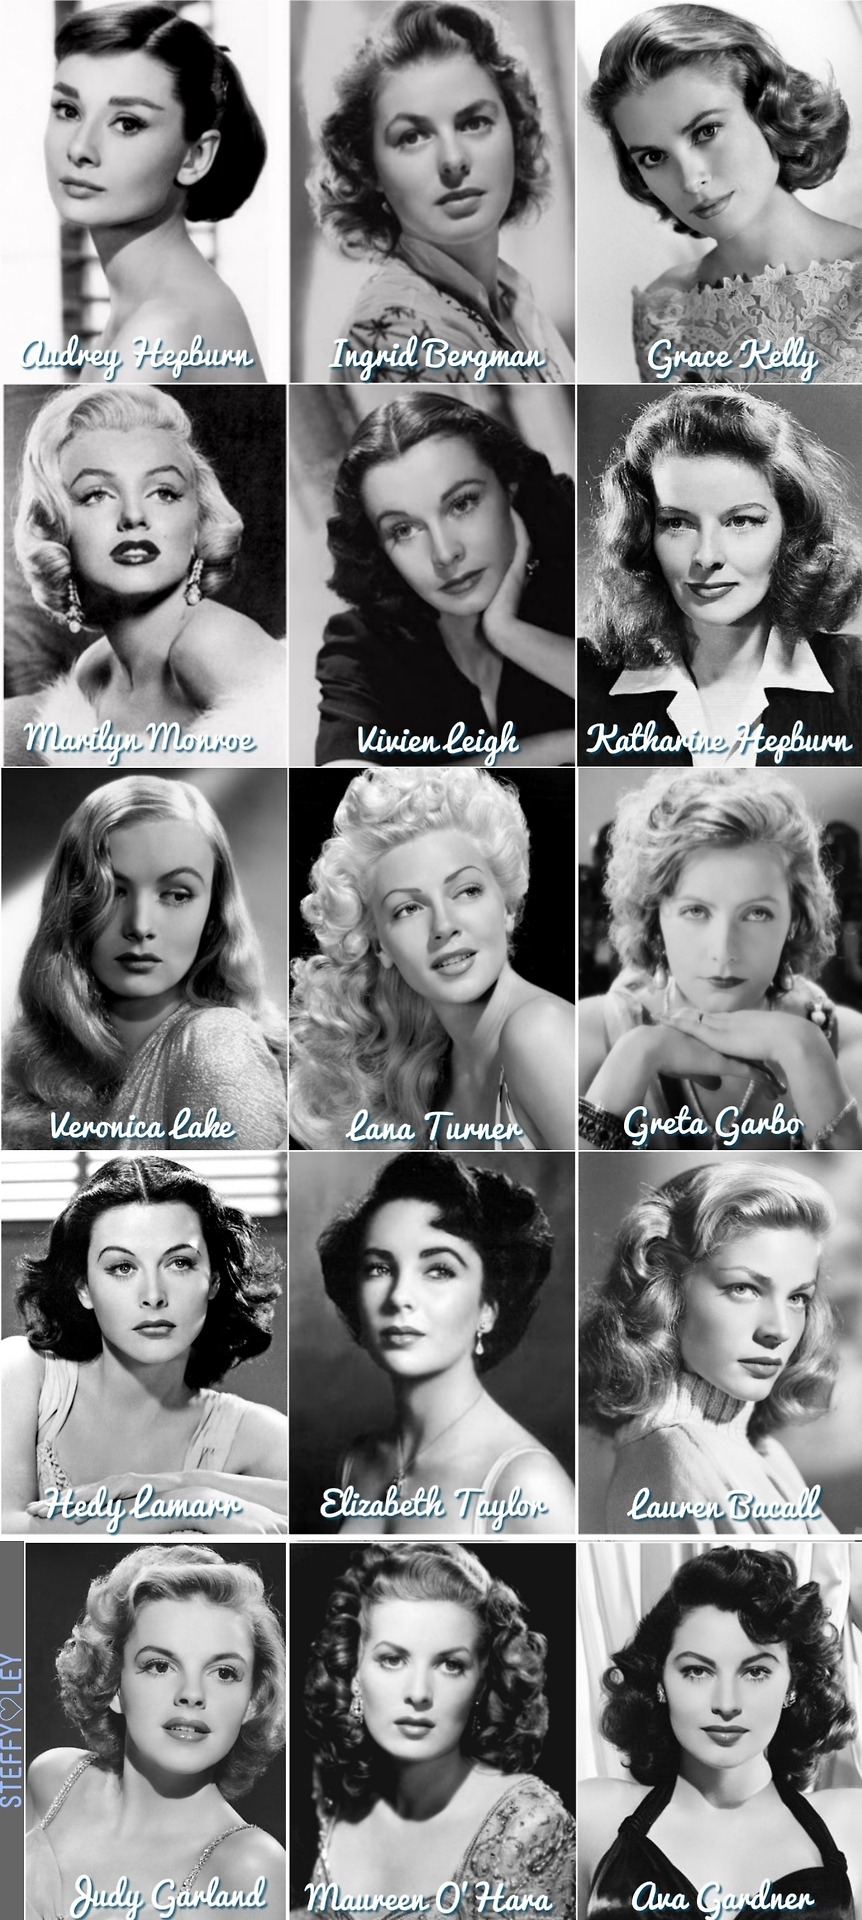 lana4always-steffy:  A collection of my favorite Hollywood stars from a bygone era